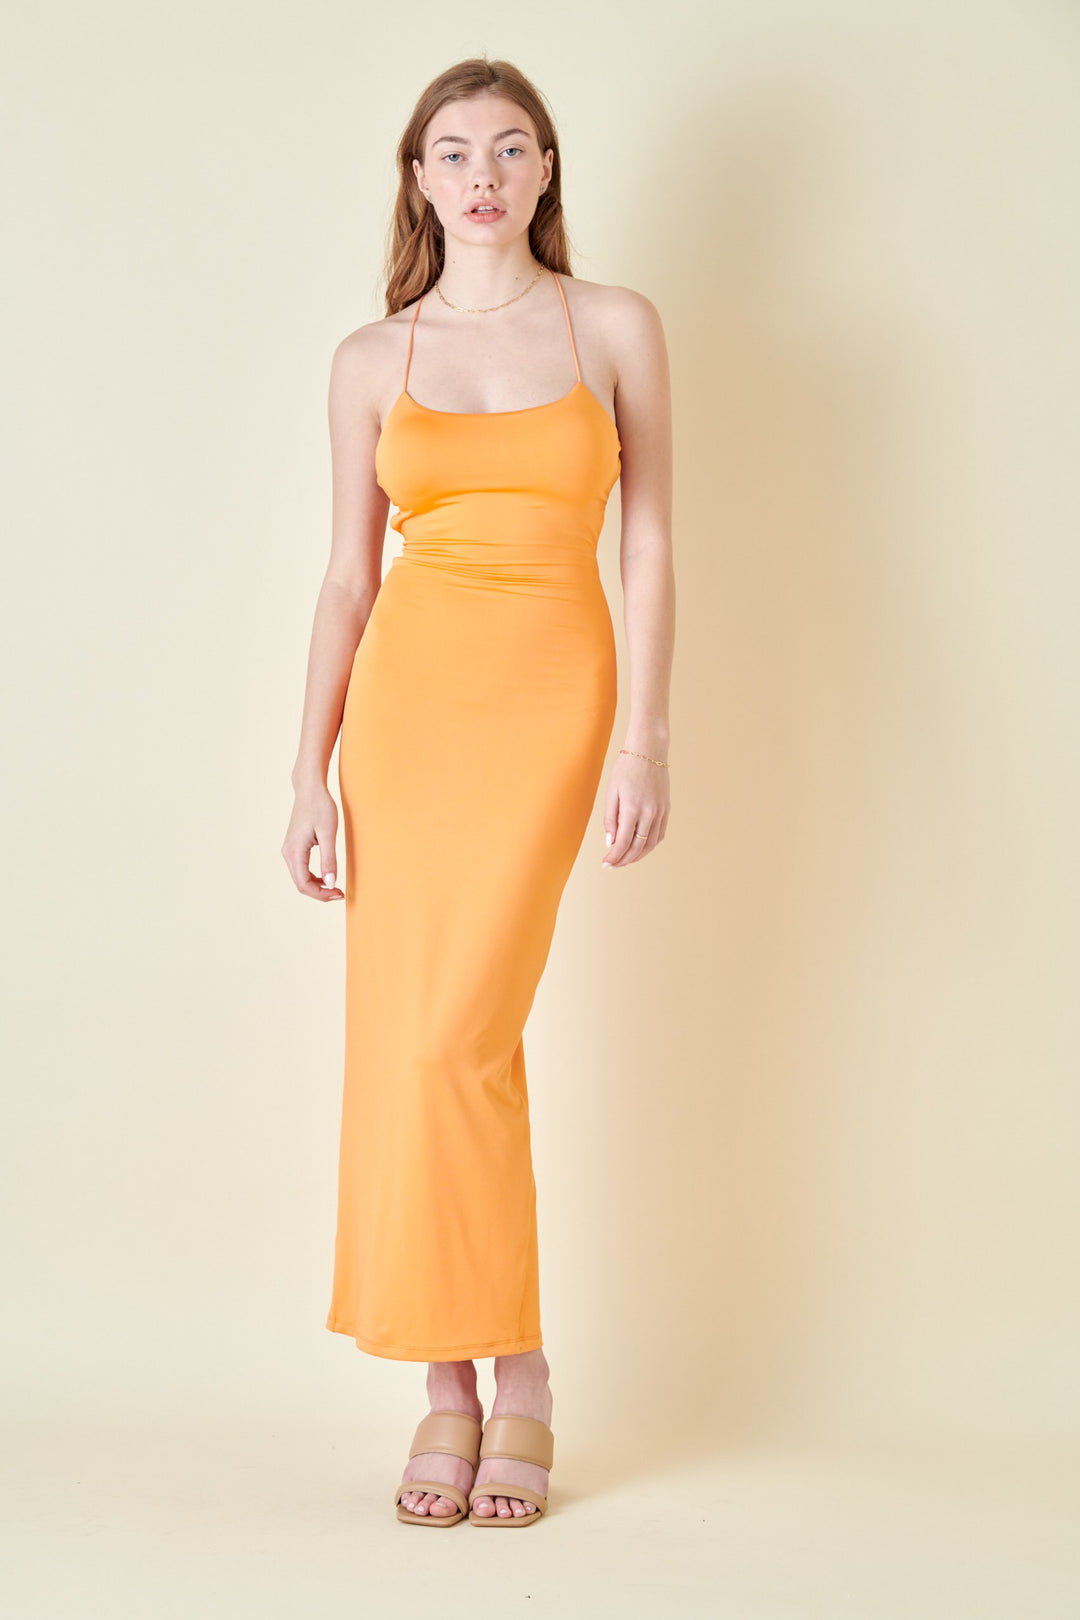 STYLED BY ALX COUTURE MIAMI BOUTIQUE Tangerine Strappy CrissCross Back Bodycon Dress